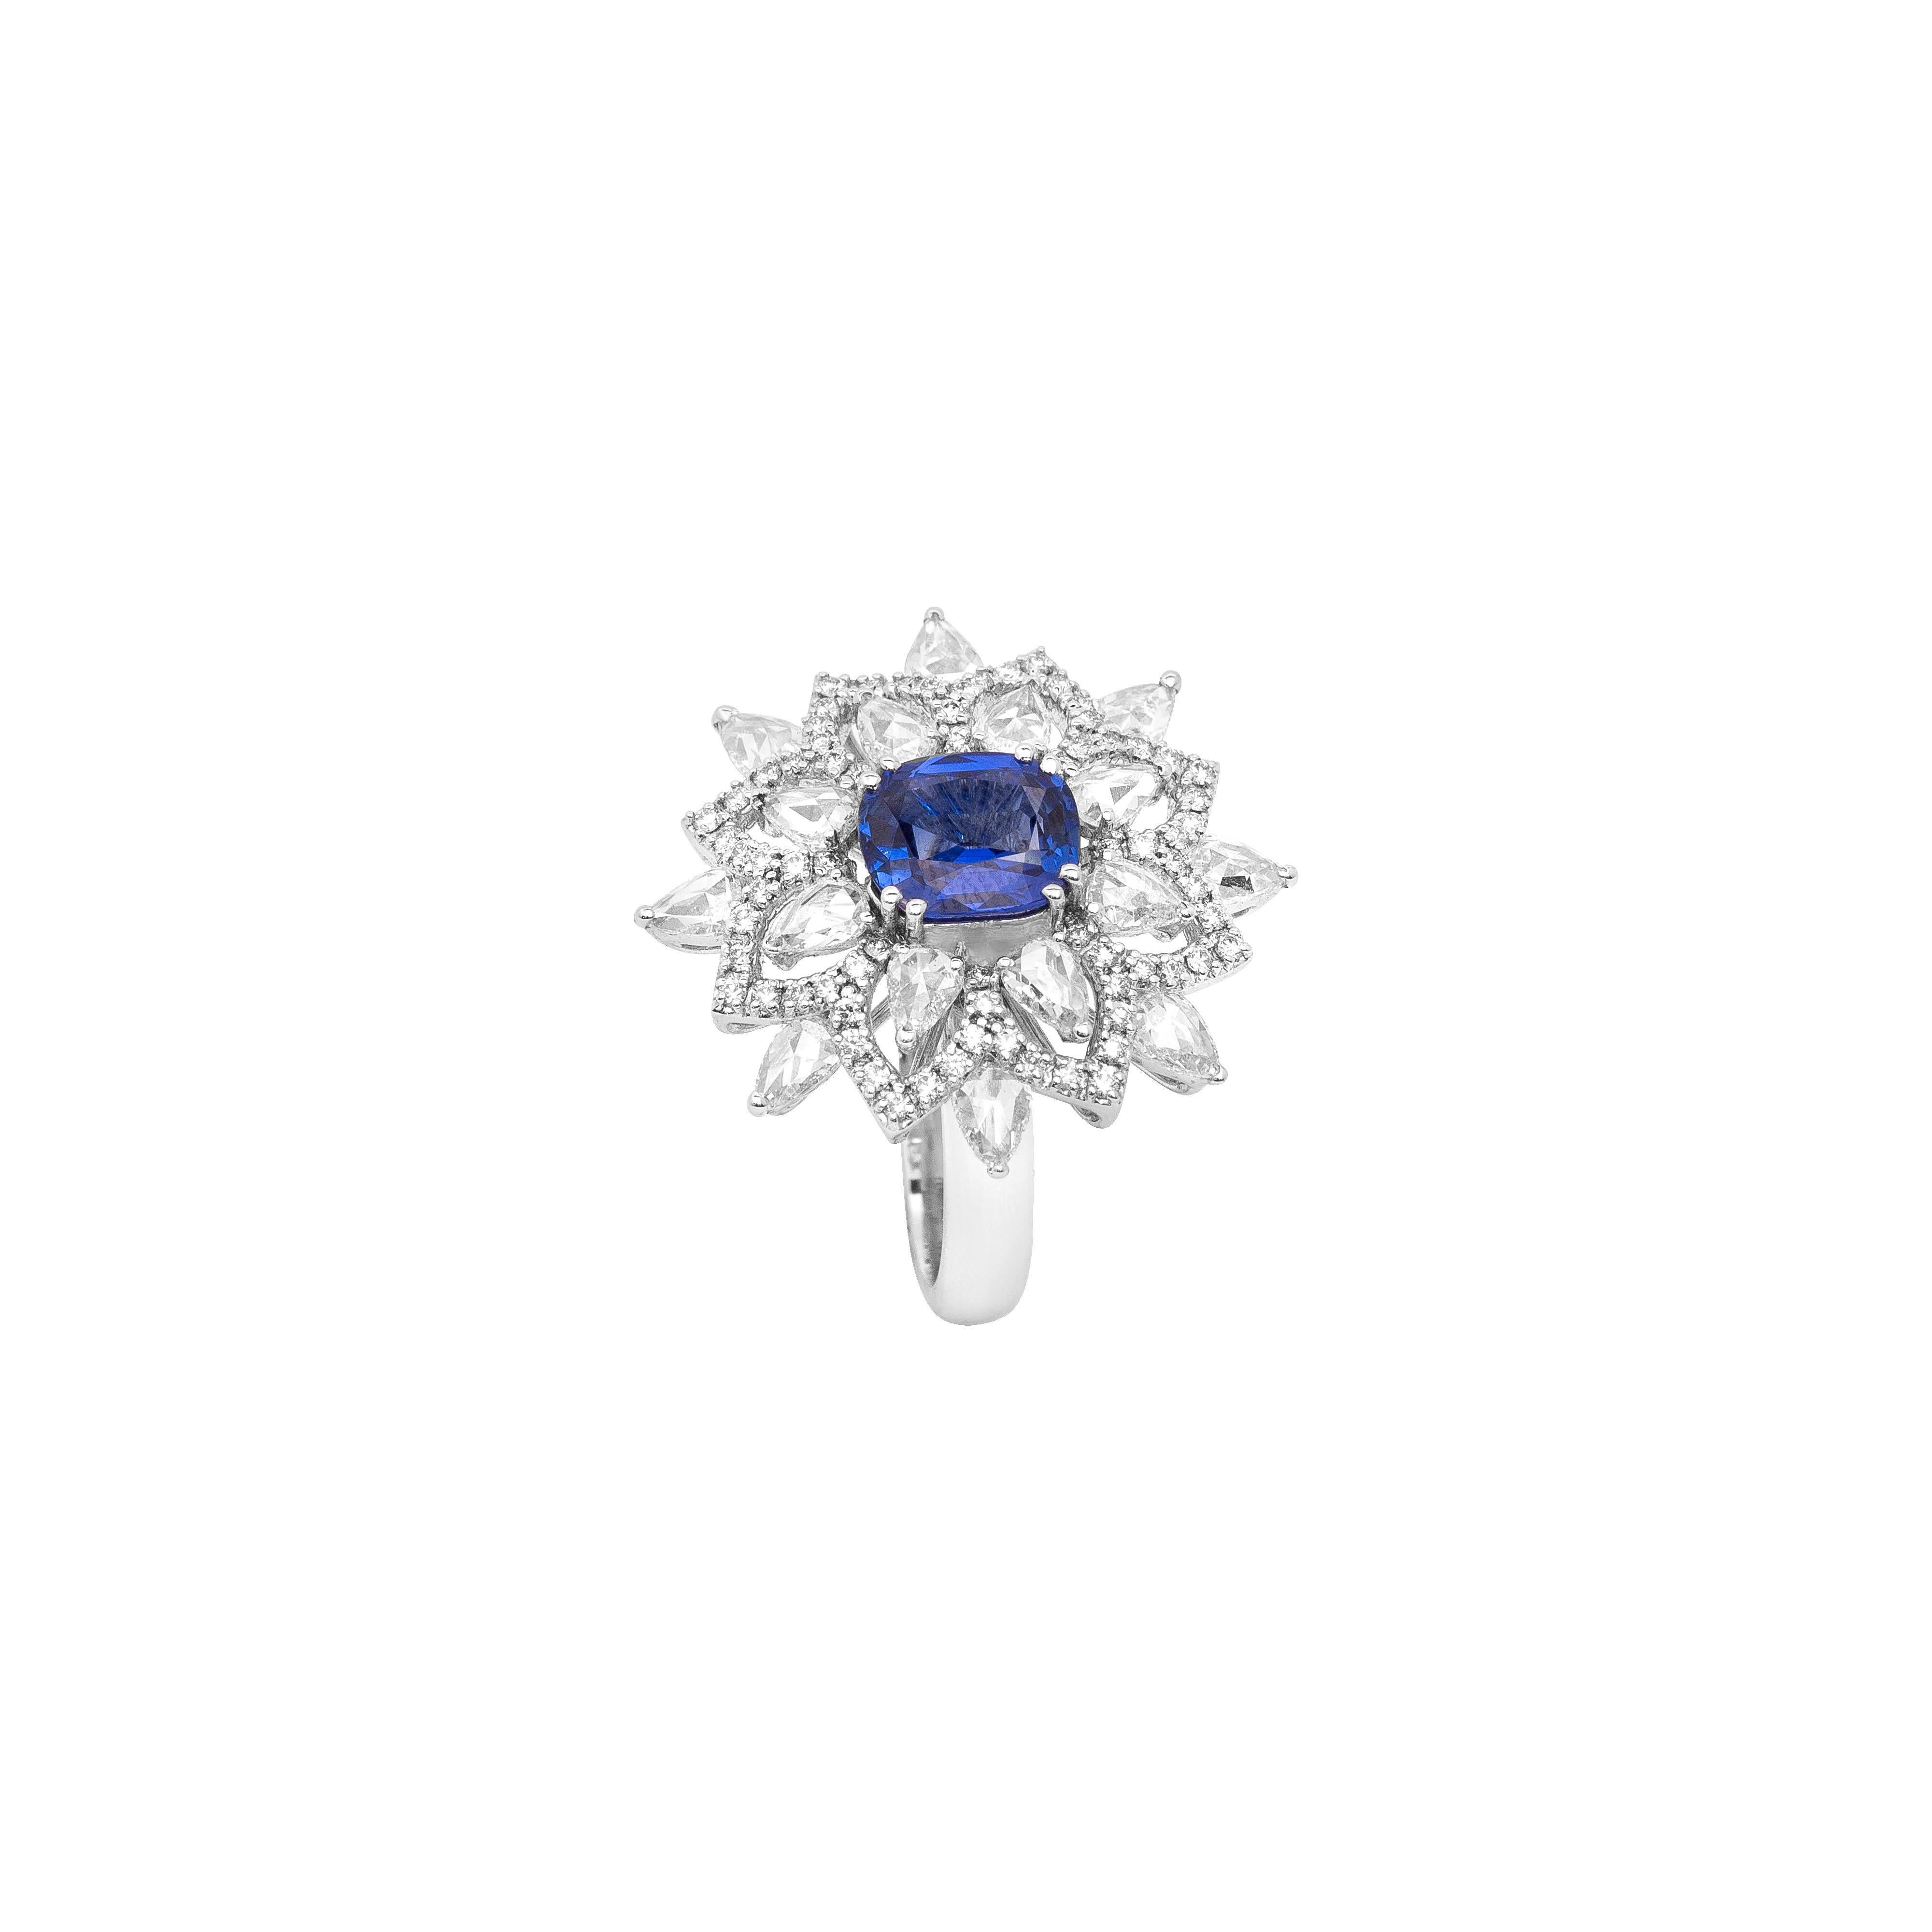 18 Karat White Gold Natural Blue Sapphire and Diamond Cocktail Ring

Beautiful Ceylon natural blue sapphire surrounded by a mix of white rose cut & brilliant cut diamonds (VVS-VS Purity) set in 18 karat white gold.

GII Cert No :